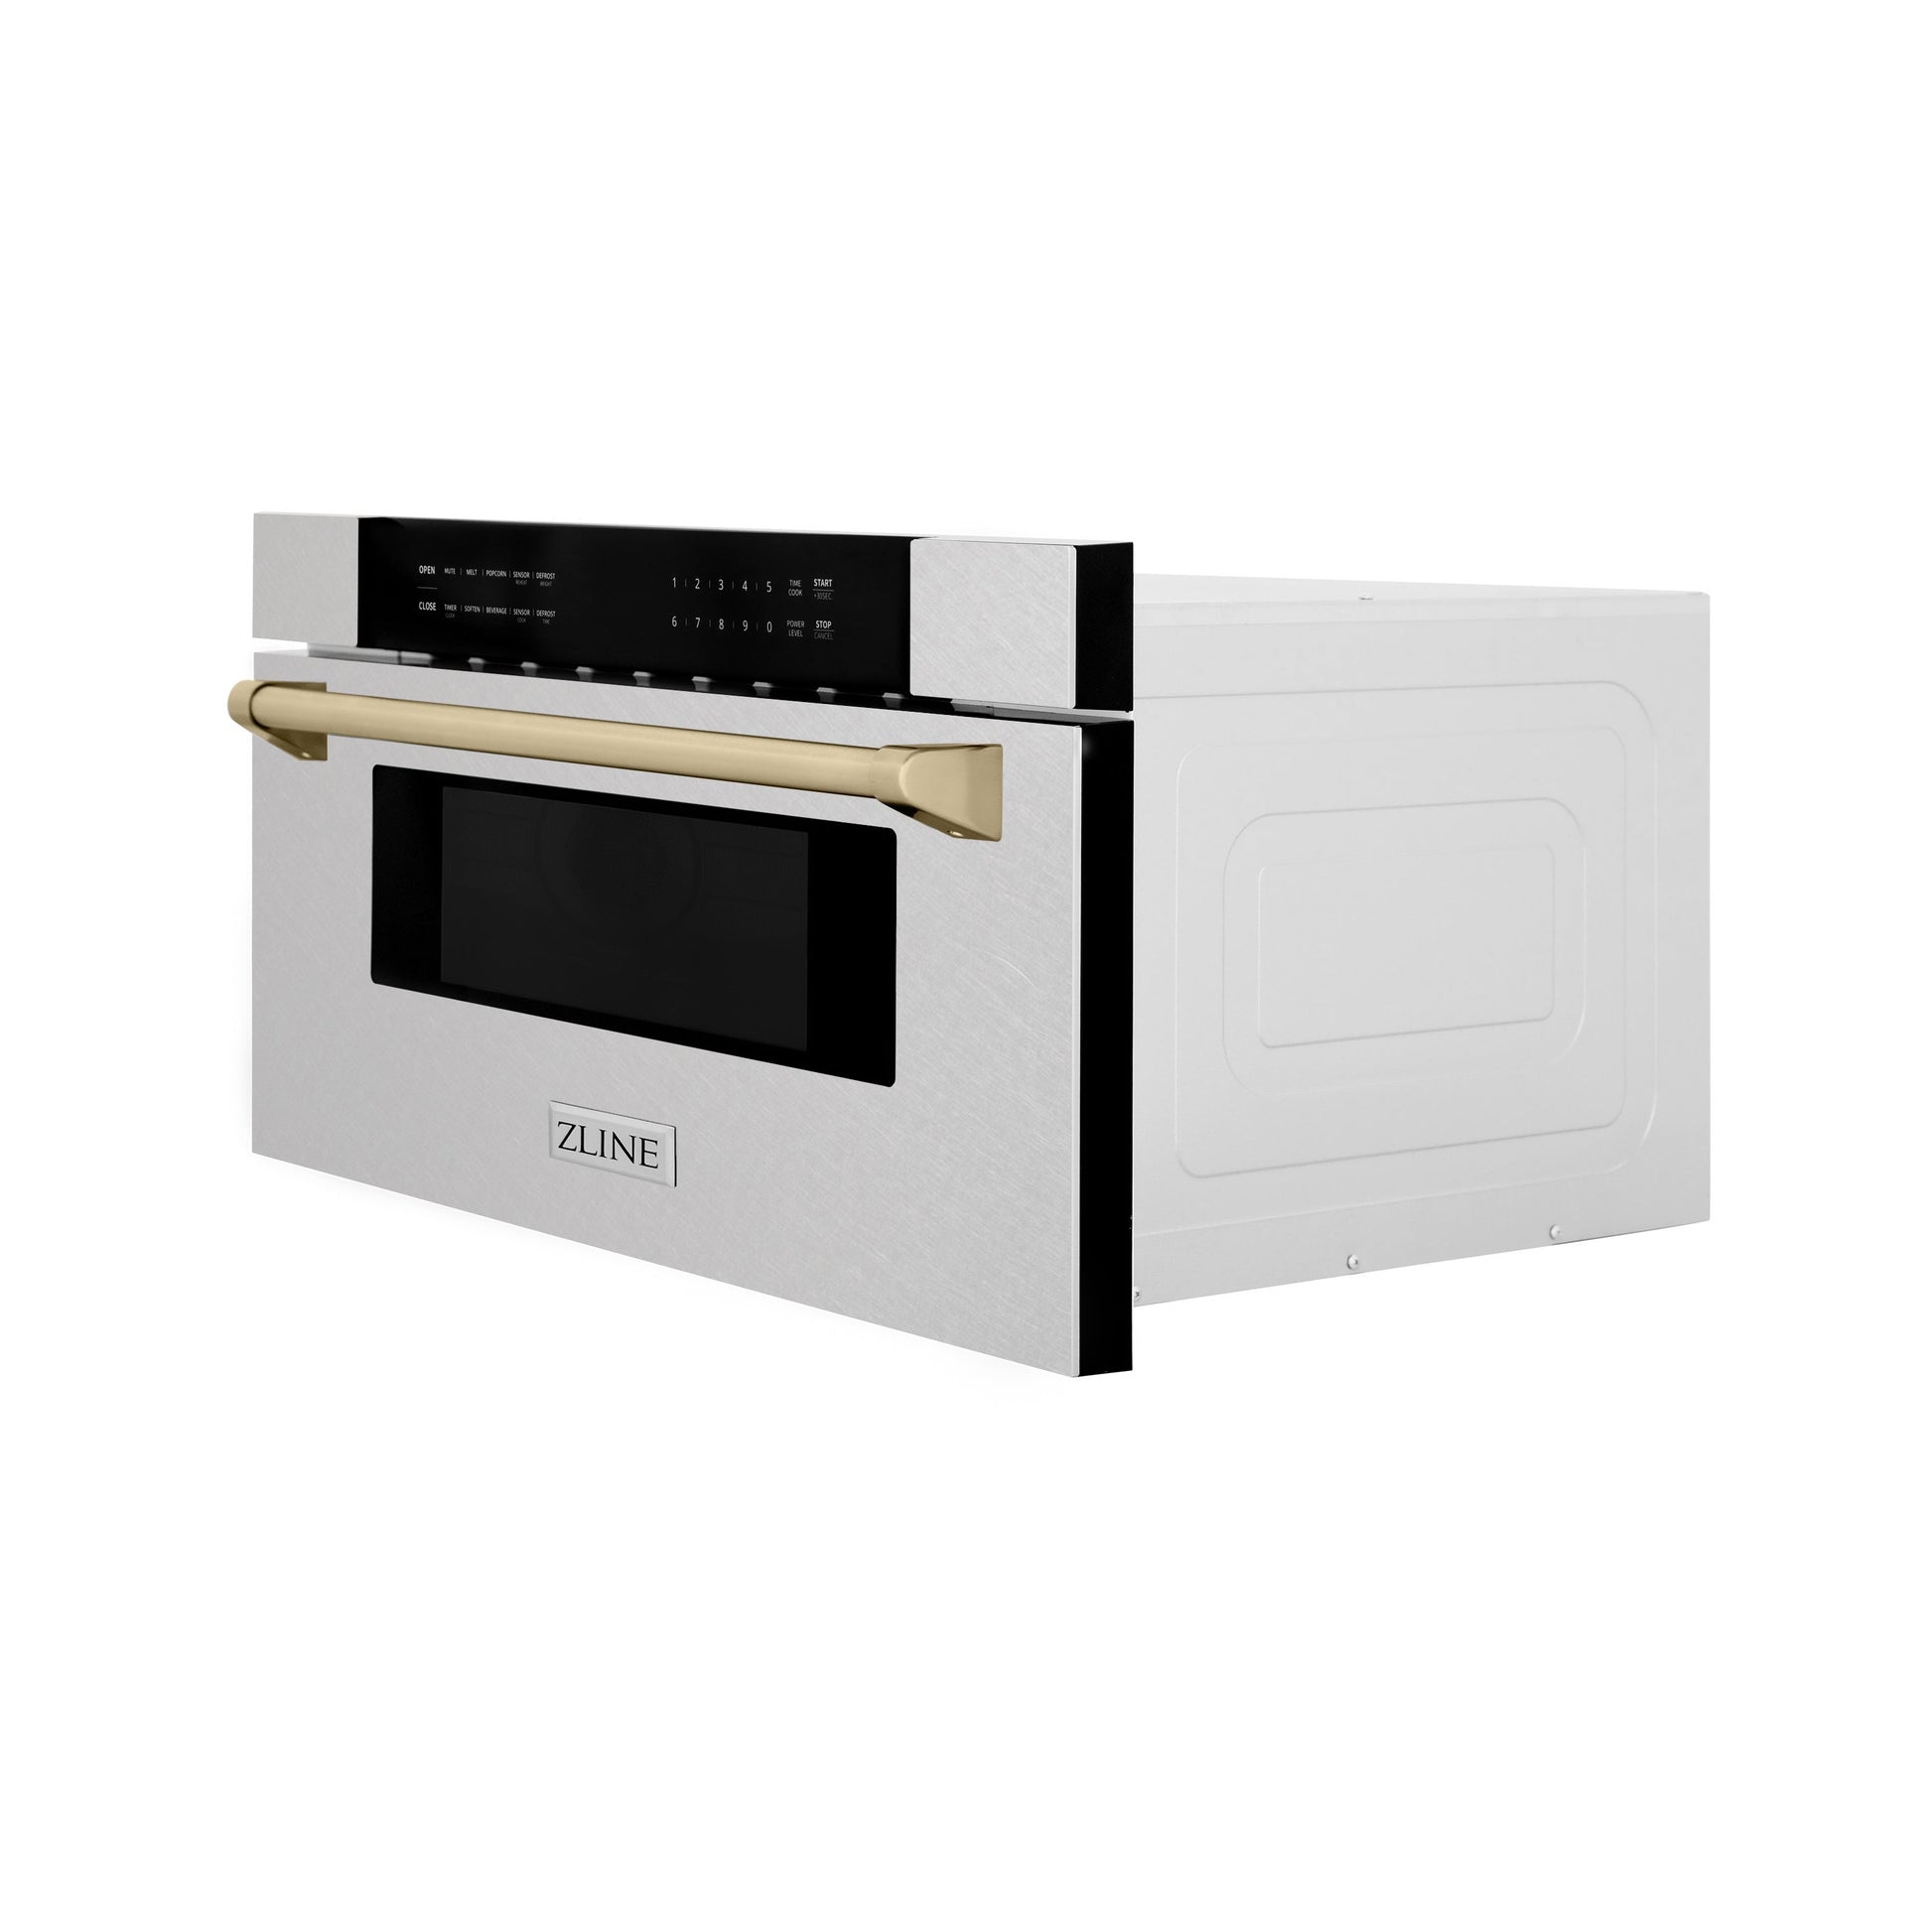 ZLINE Autograph Edition 30" Built-In Microwave Drawer - Fingerprint Resistant Stainless Steel with Accents